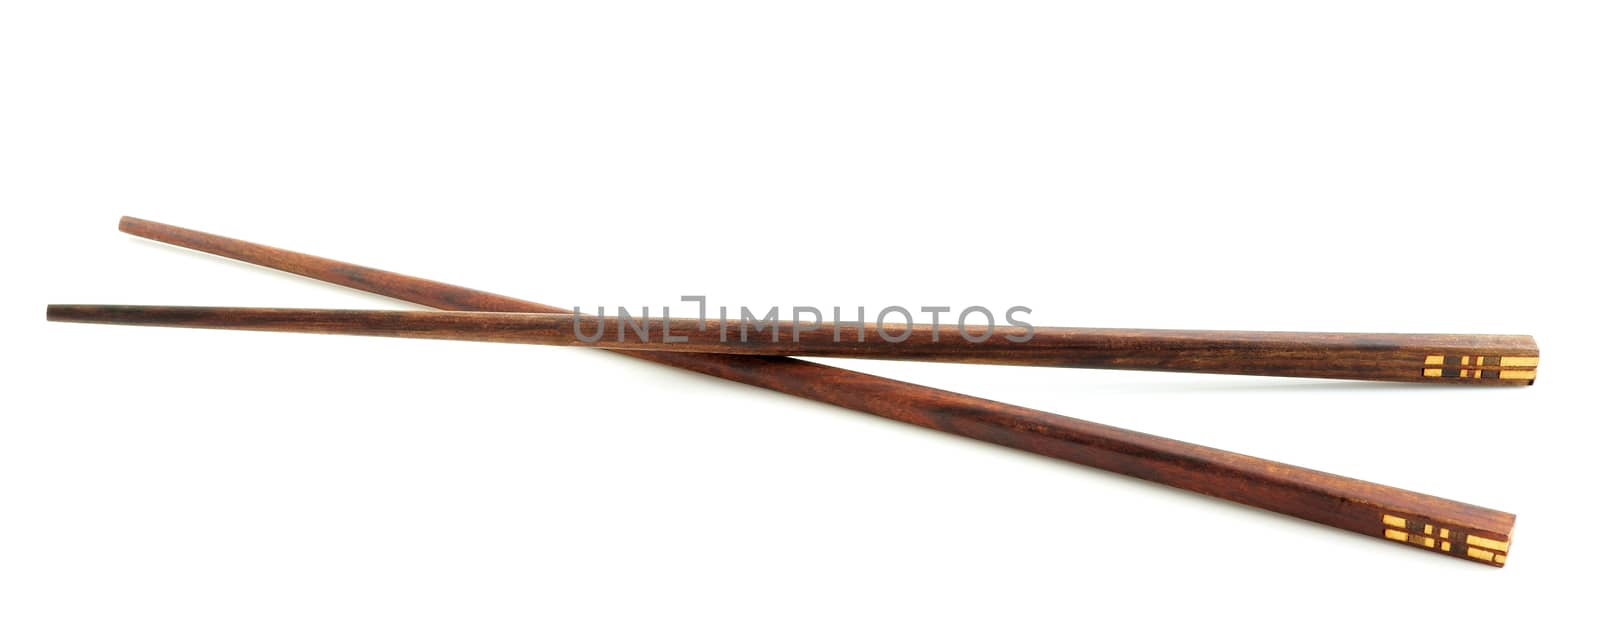 Wooden chopsticks, isolated on white background. by sommai